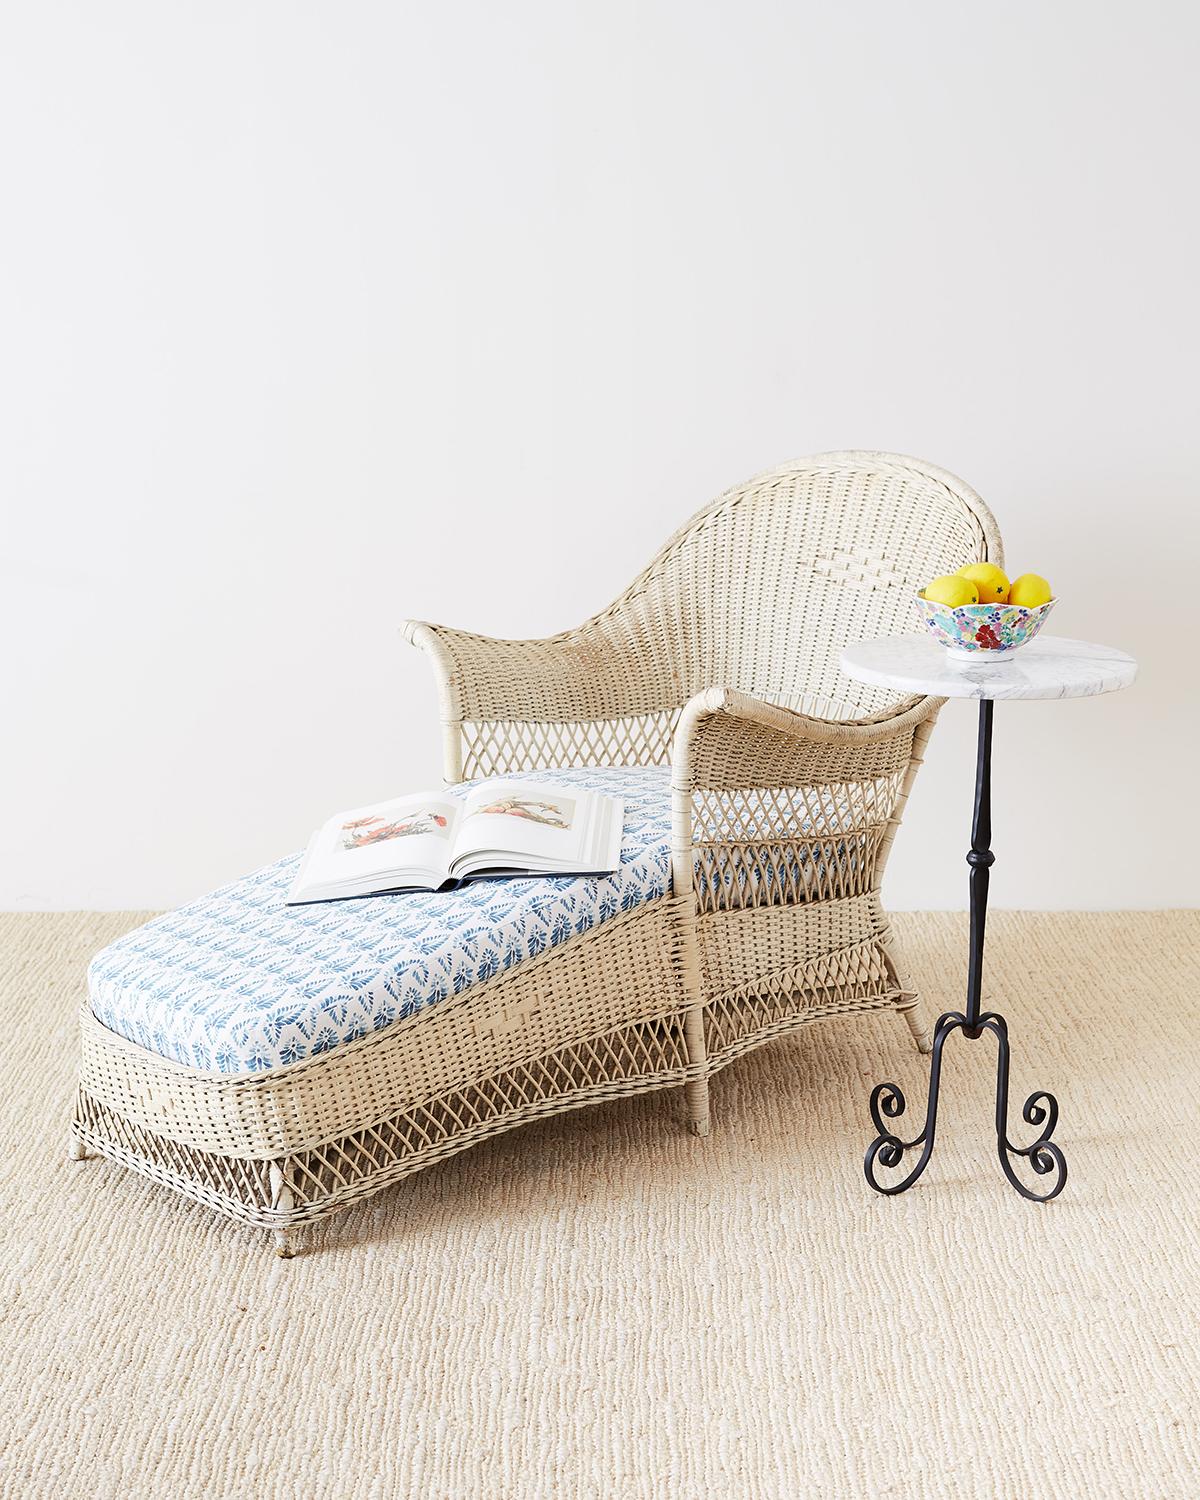 Attractive Bar Harbor style willow and wicker chaise lounge or longue featuring a vintage painted finish. The sculptural frame is covered with hand crafted wicker and willow with decorative designs on the back and apron. Supported by six legs that